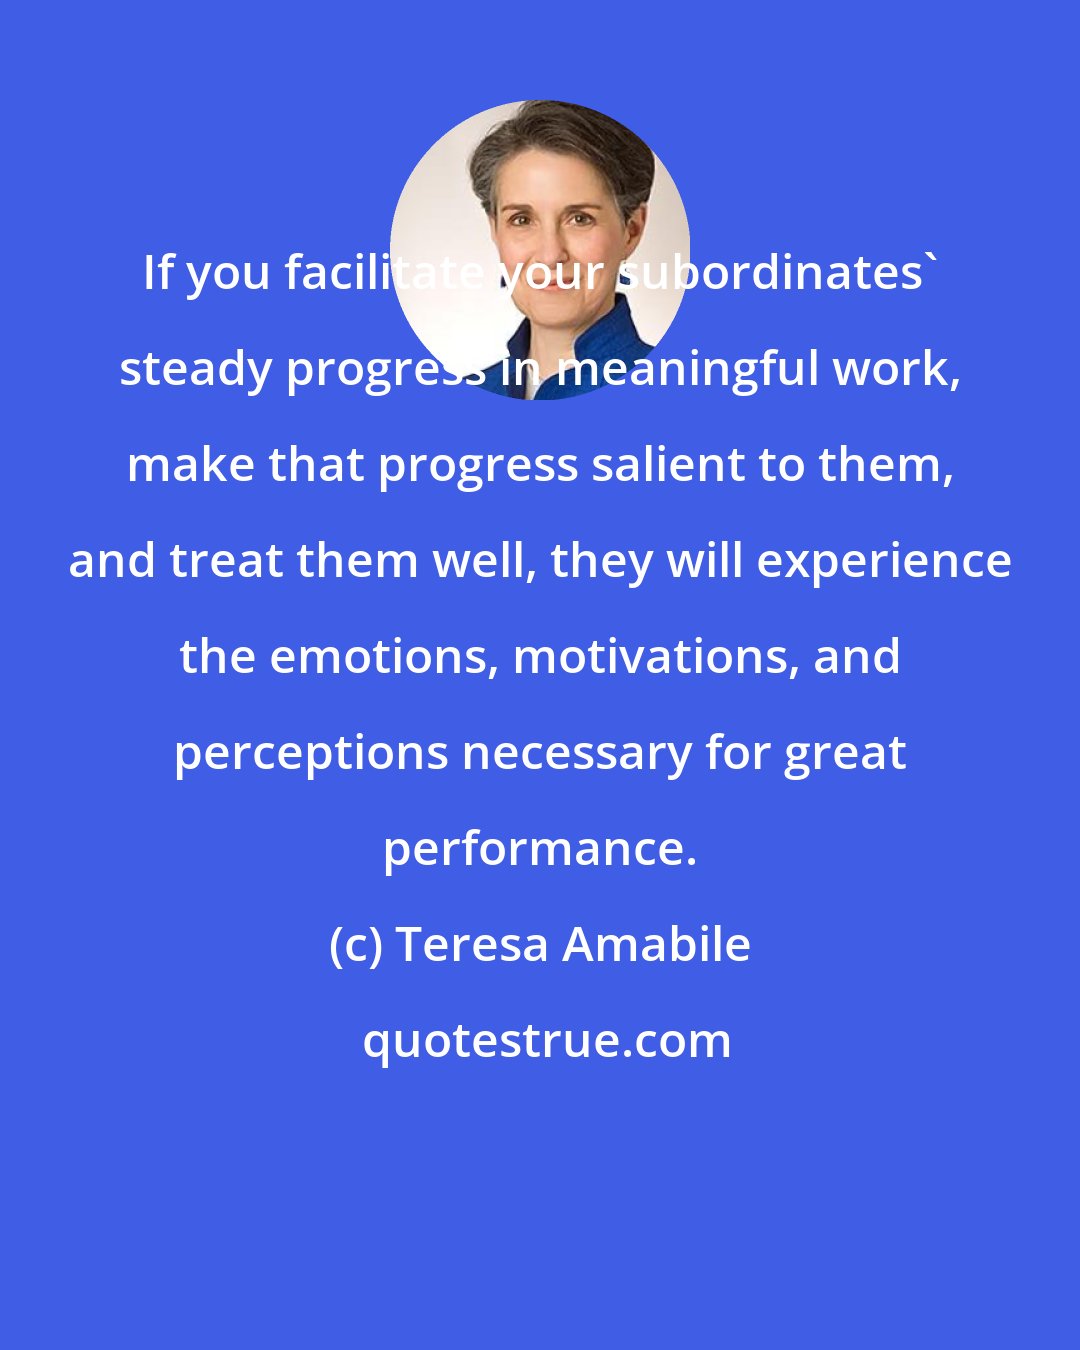 Teresa Amabile: If you facilitate your subordinates' steady progress in meaningful work, make that progress salient to them, and treat them well, they will experience the emotions, motivations, and perceptions necessary for great performance.